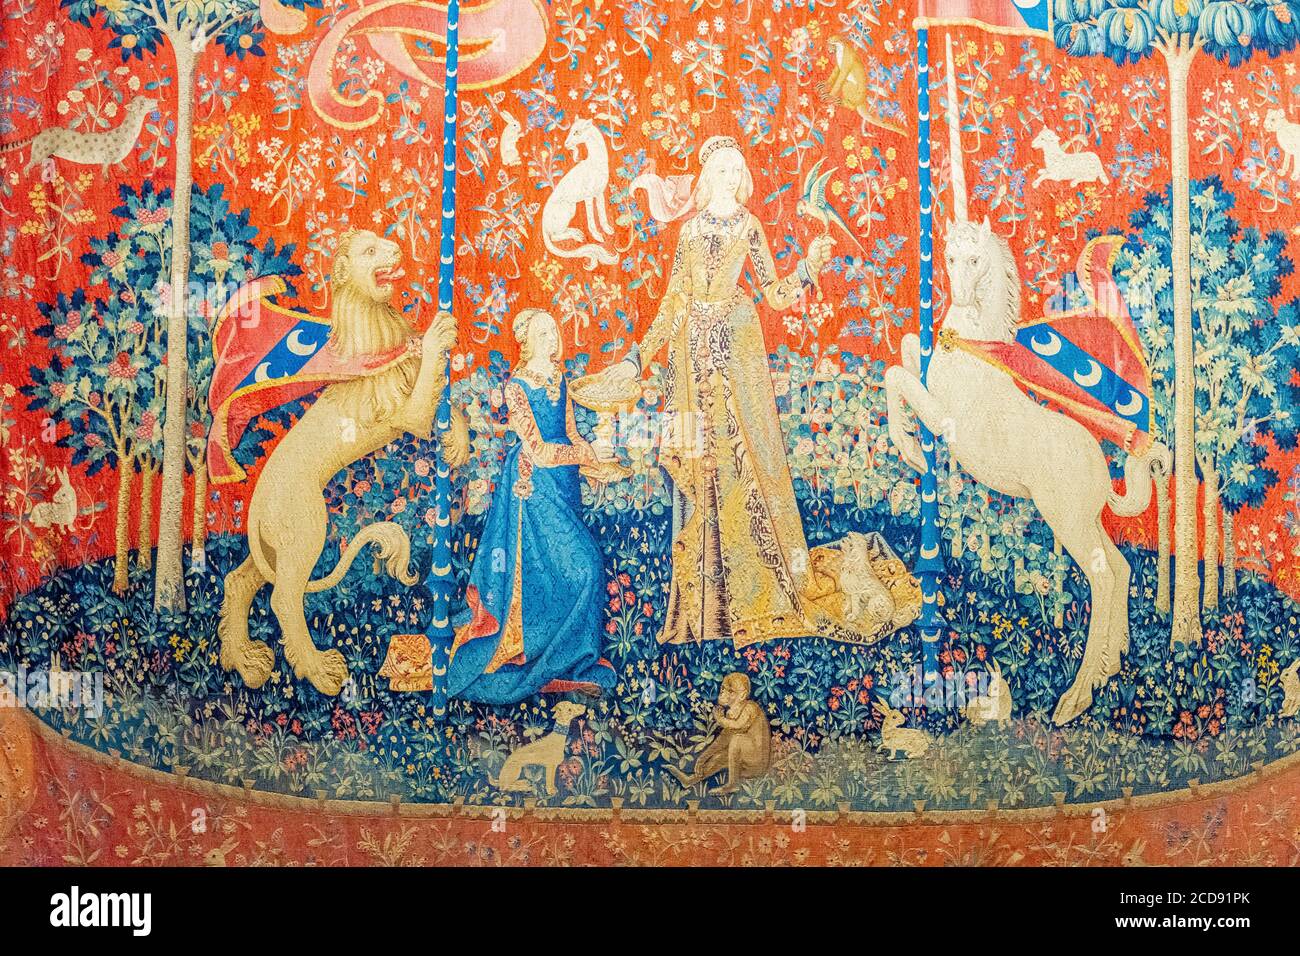 France, Paris, National museum of the Middle Ages-Cluny museum, Tapestries of the Lady with the Unicorn: The Taste Stock Photo